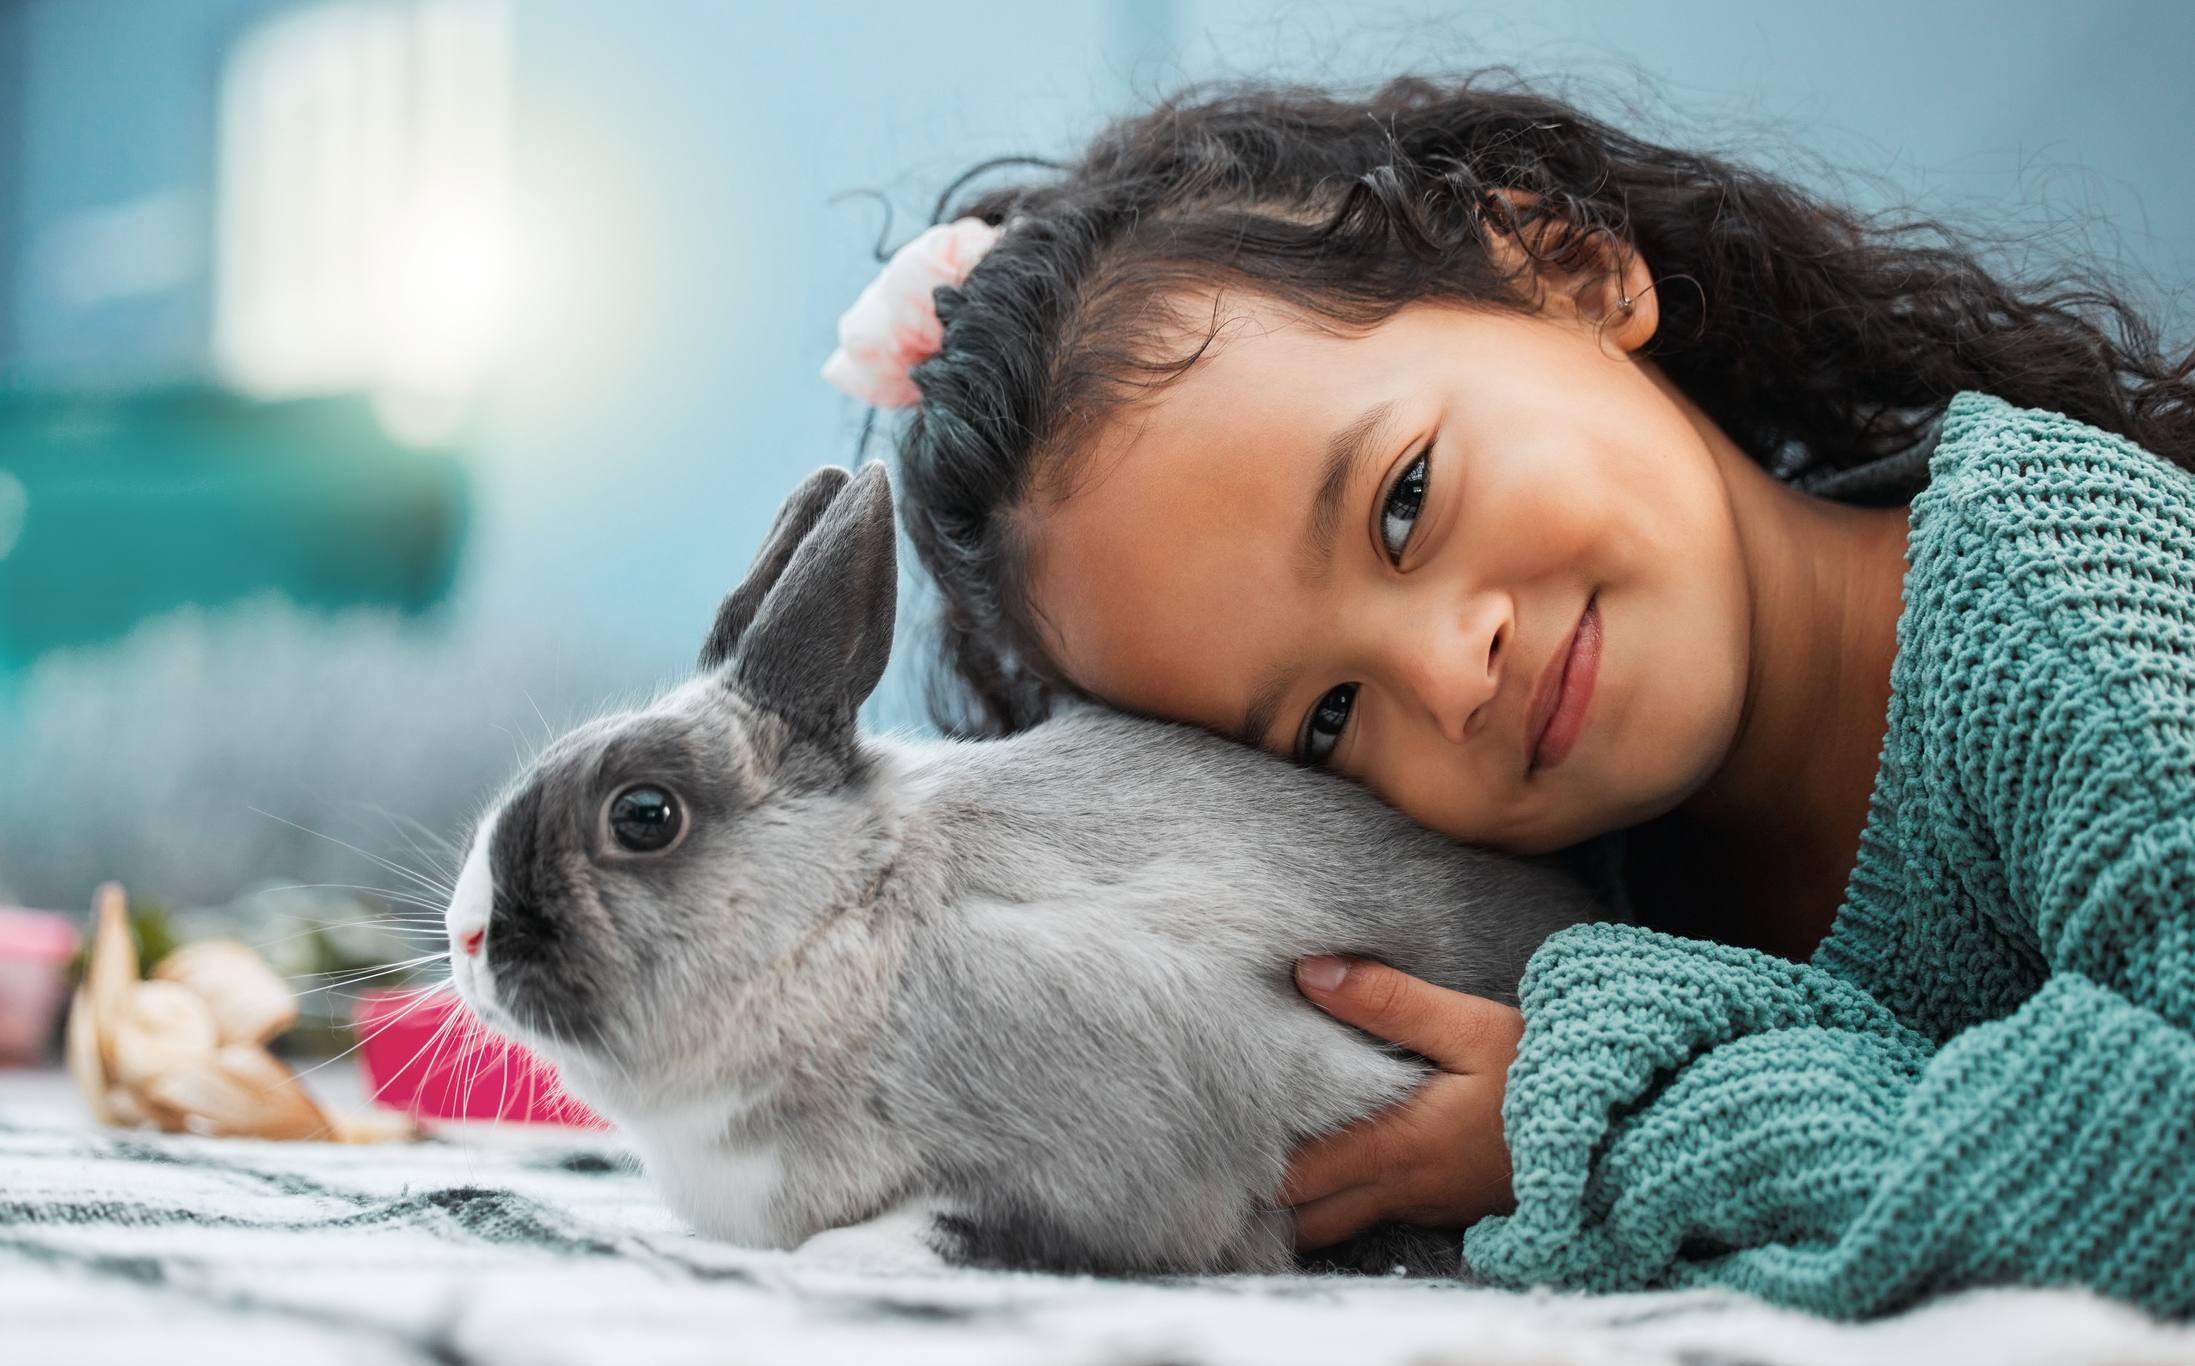 Smiling girl holding pet rabbit at home